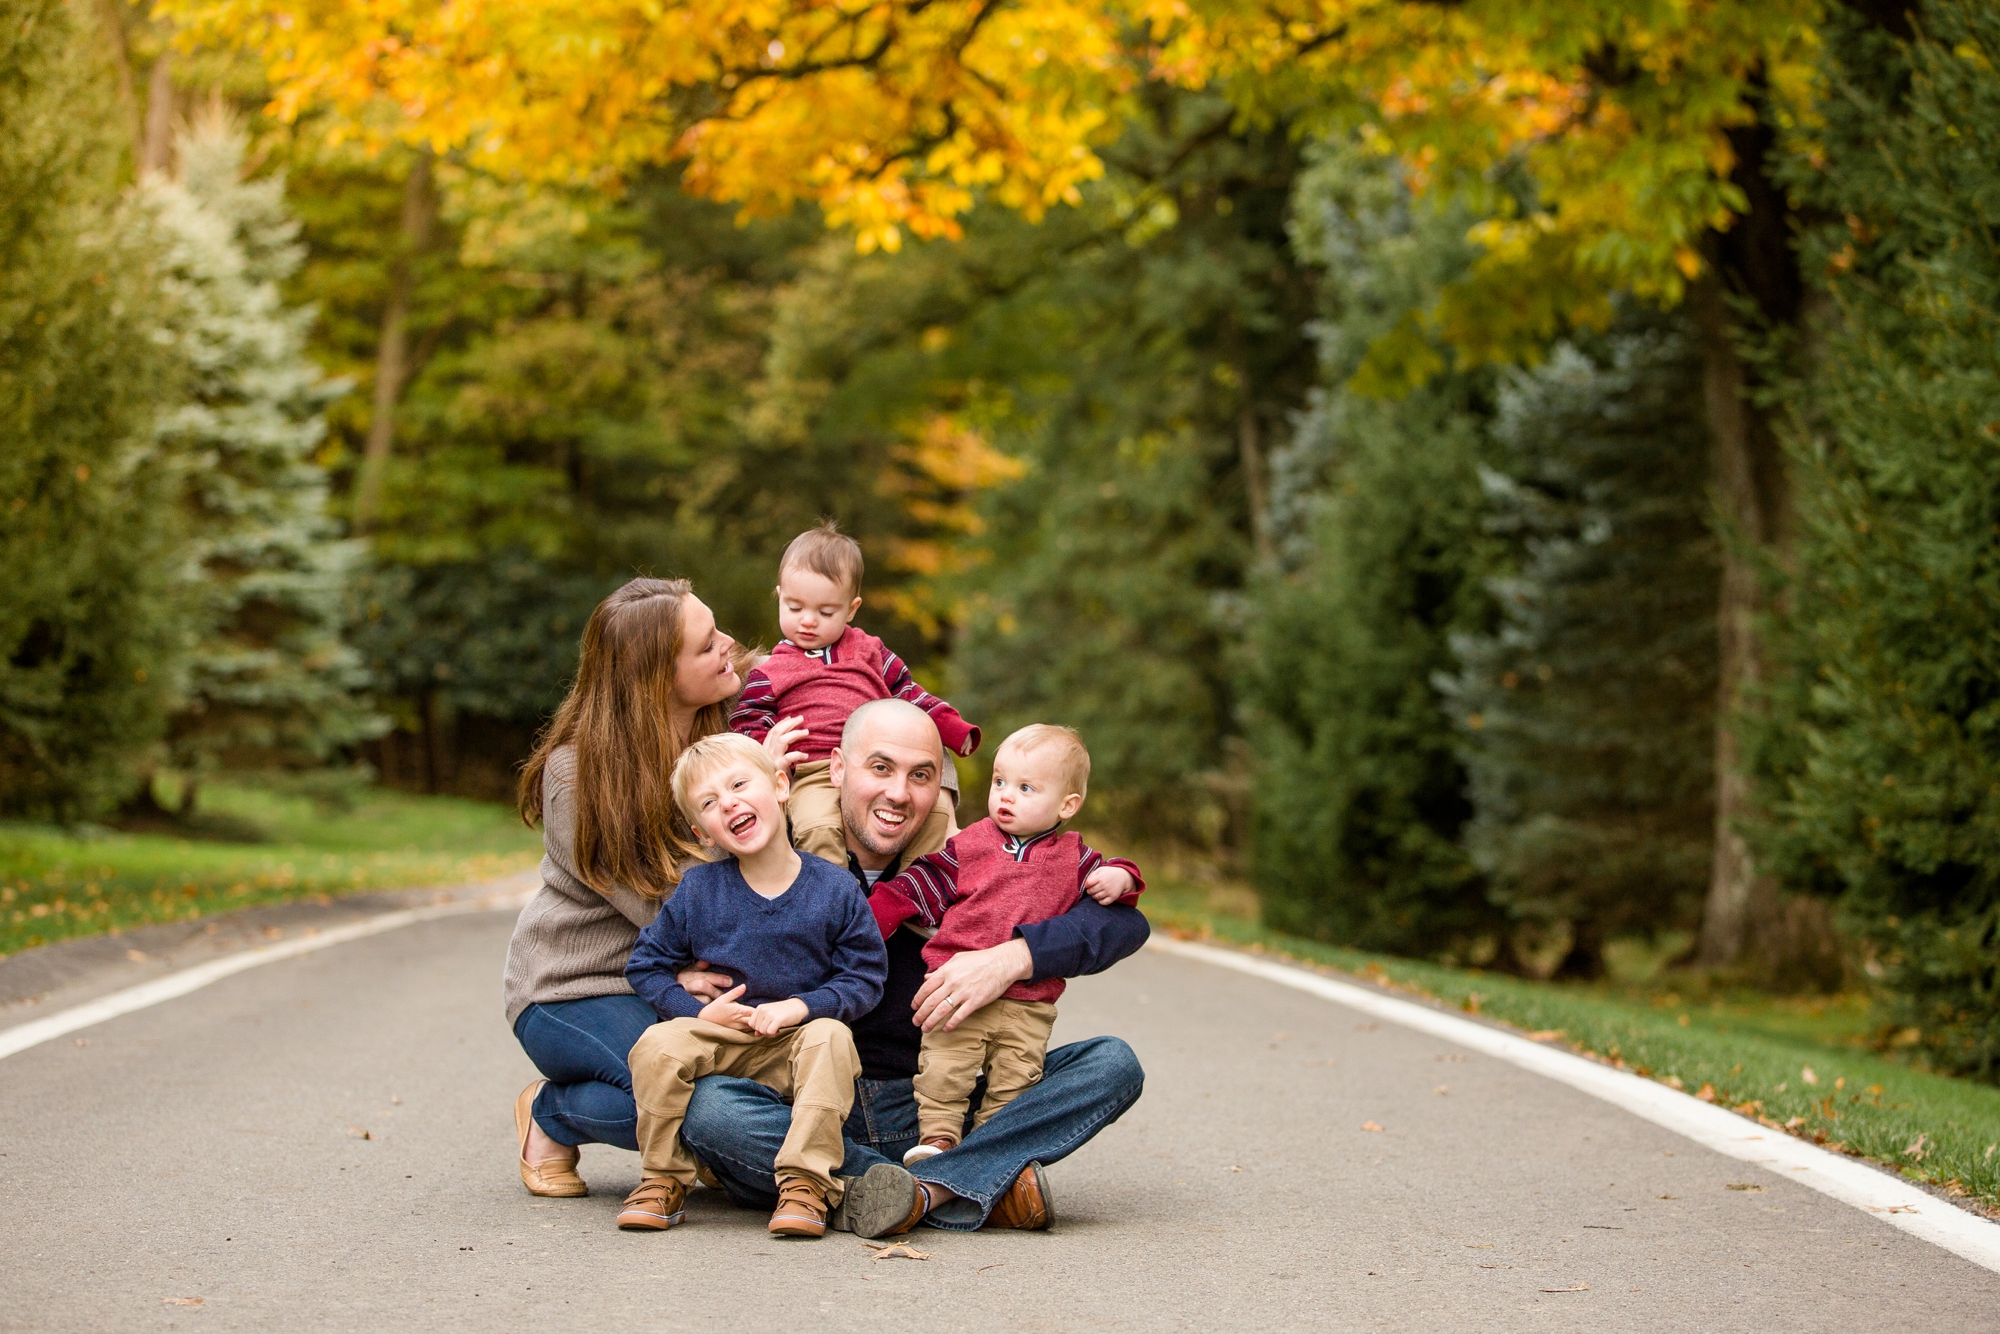 pittsburgh family photographer, cranberry township family photographer, wexford family photographer, hartwood acres family photos